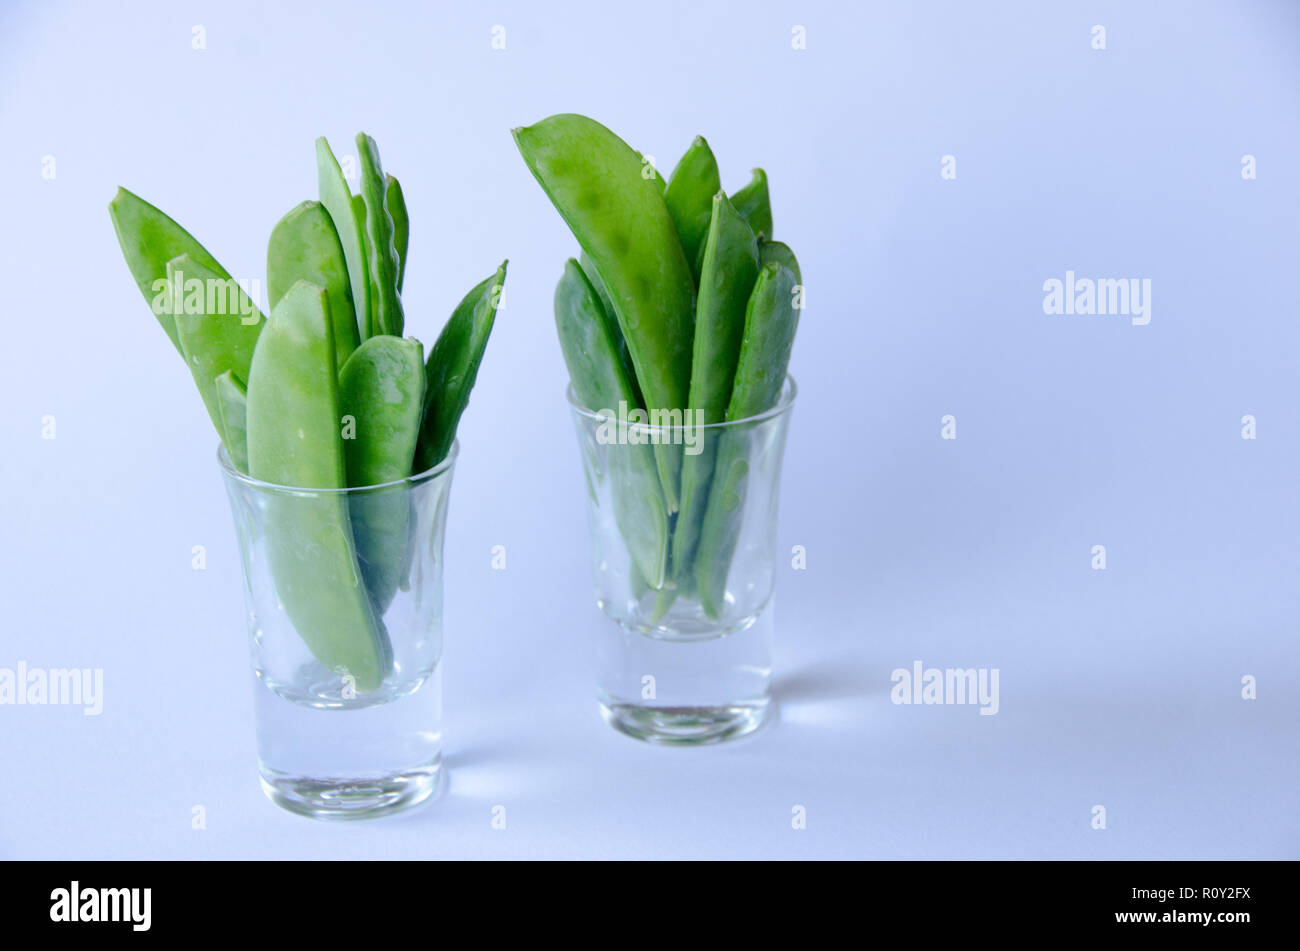 A bunch of snow peas standing up in a little glass on white background Stock Photo